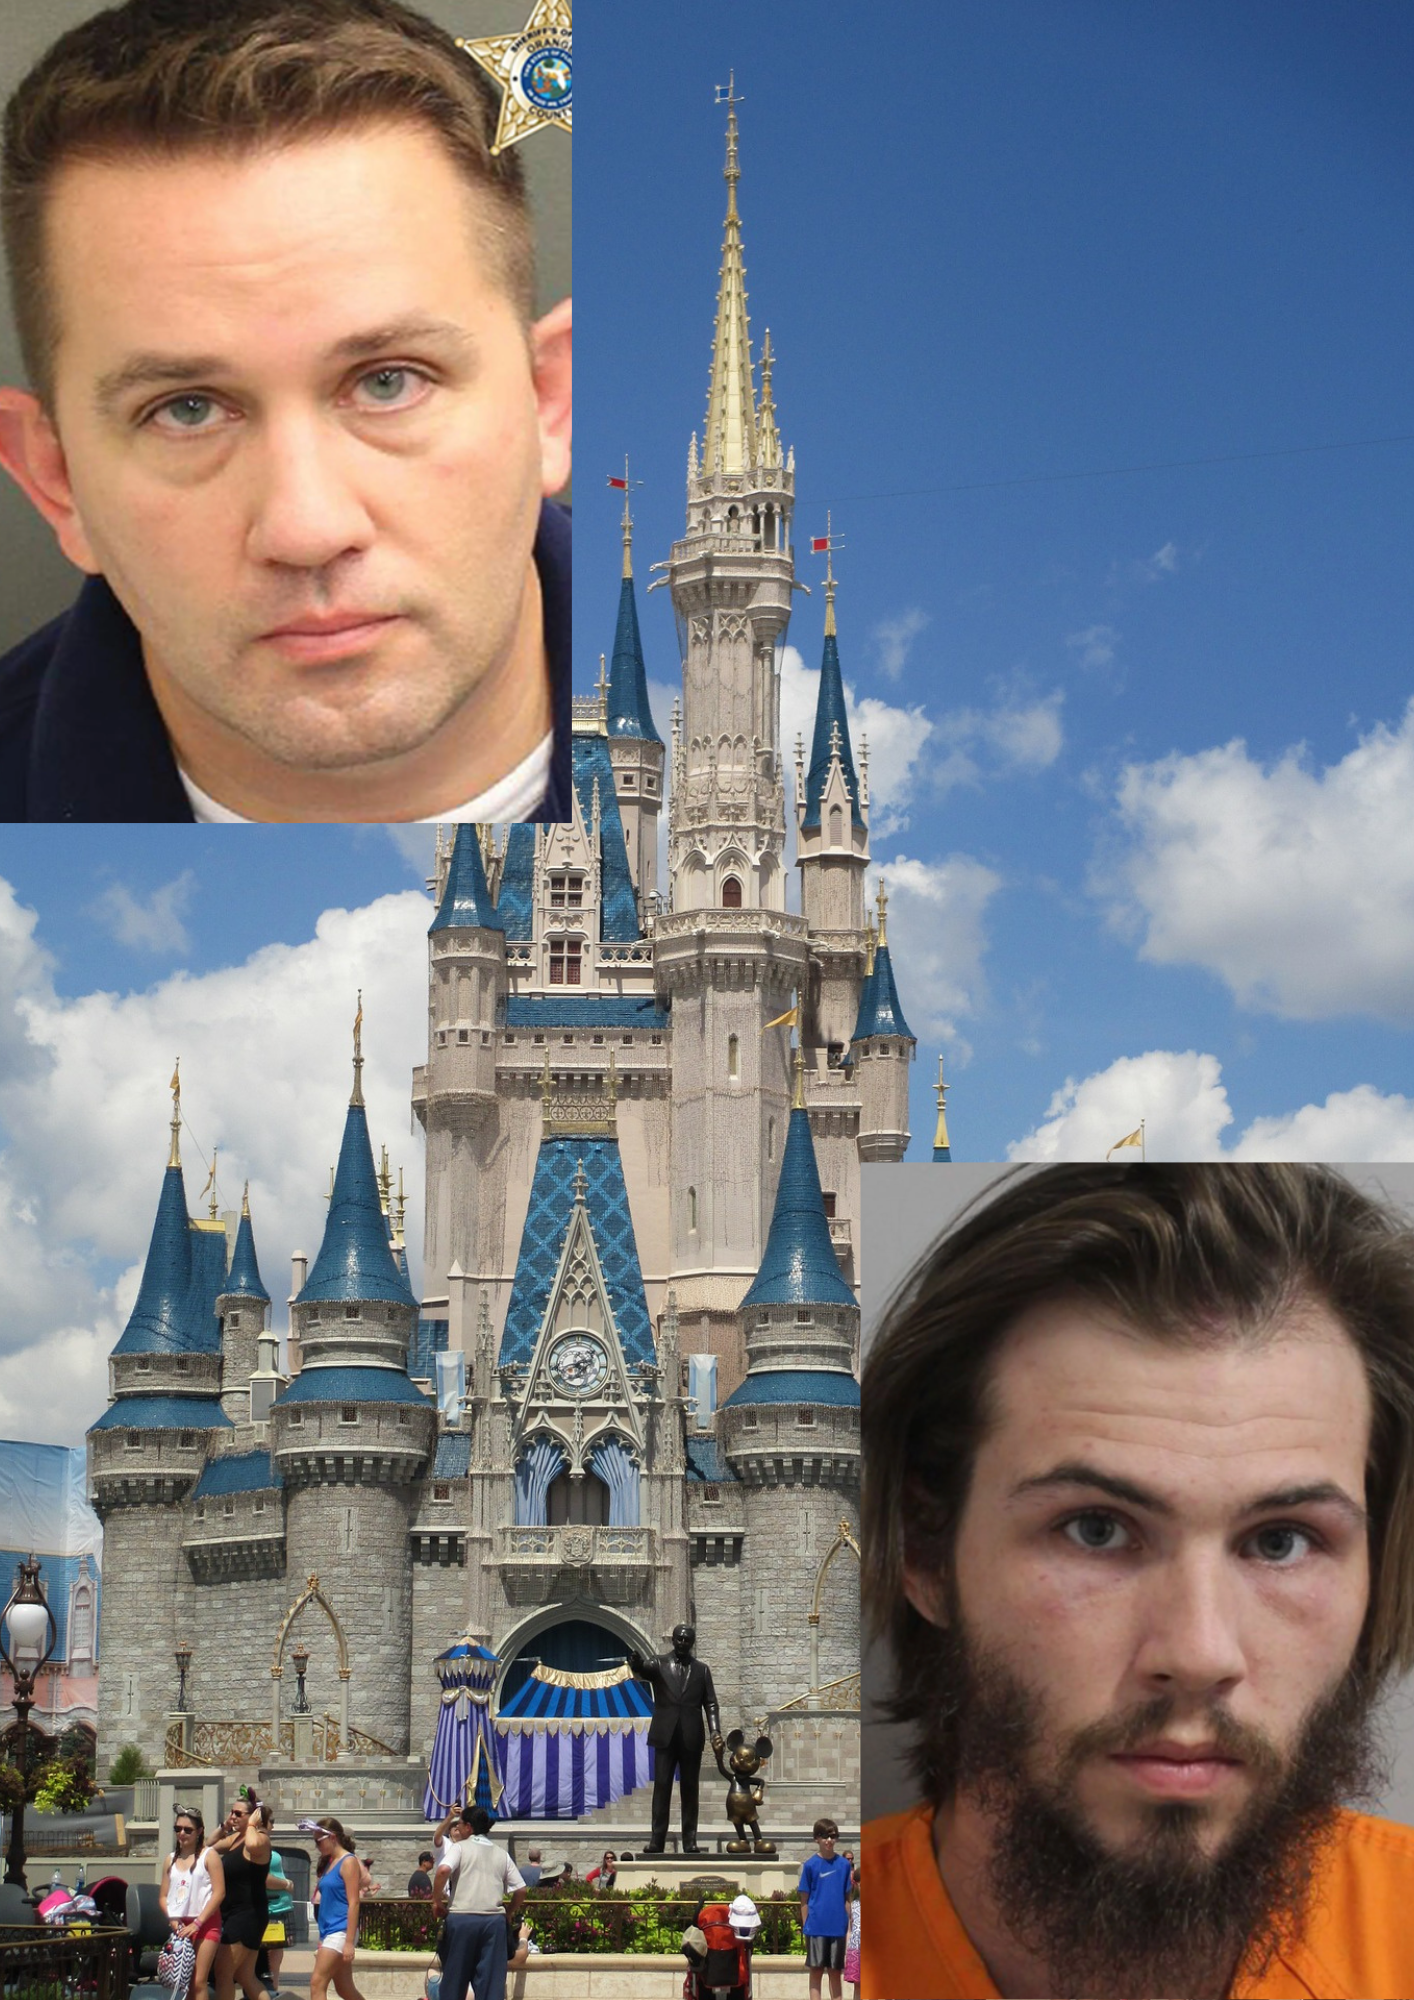 Operation Cyber Guardian II Nabs 2 More Disney Employees During Undercover Sexual Predator Sting 1